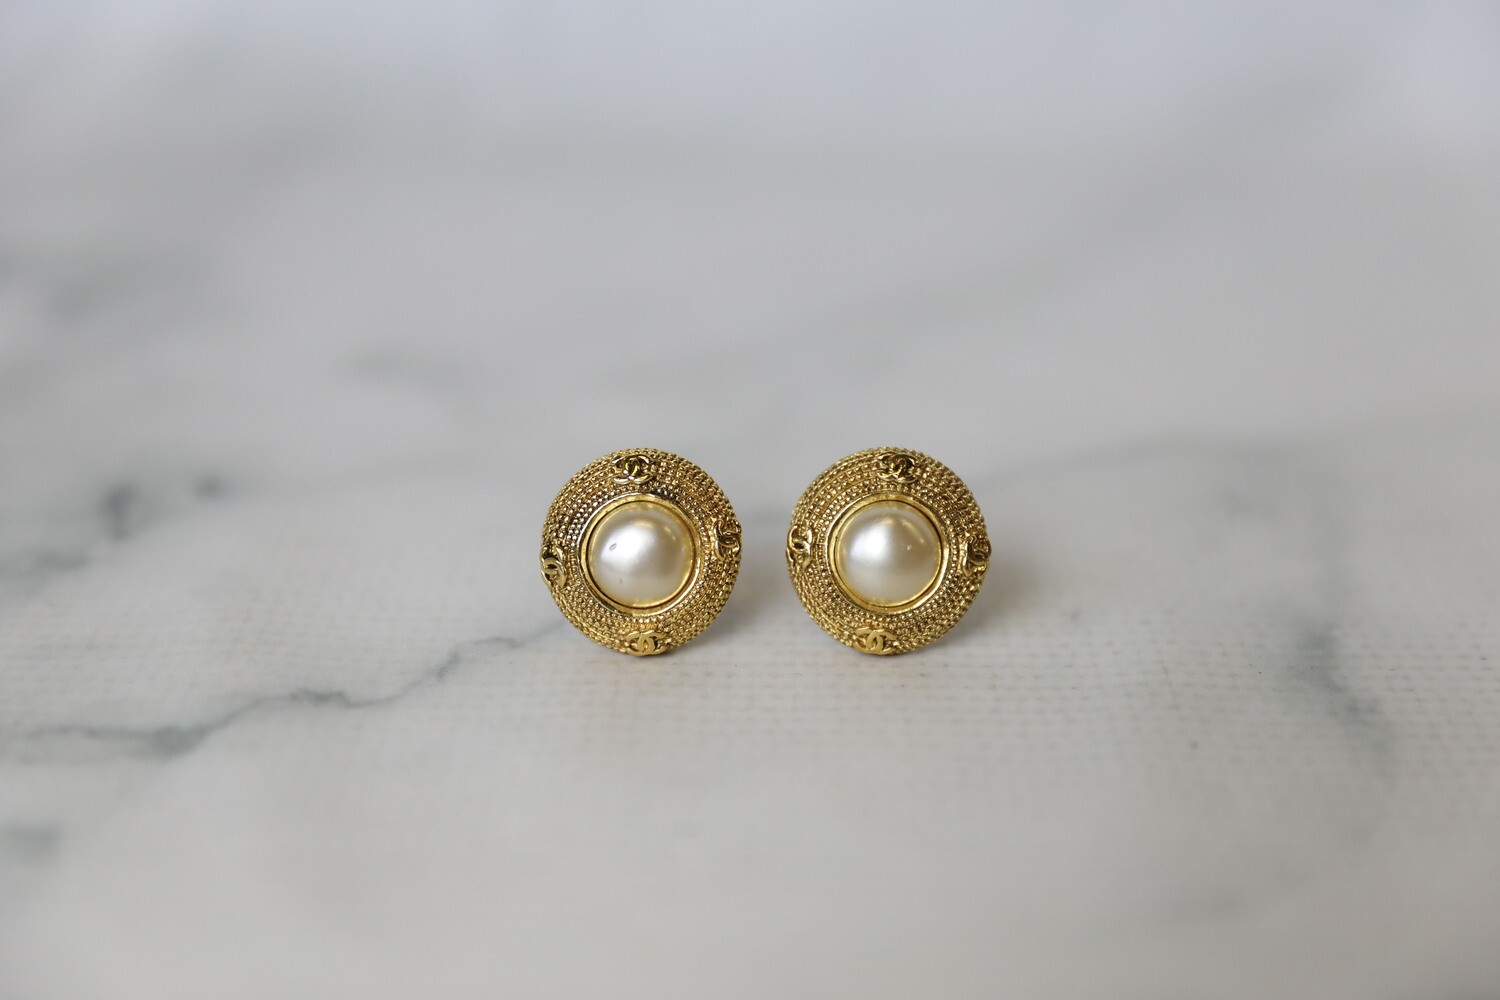 Chanel Vintage Clip On Earrings, Golden Round with Pearl, Preowned